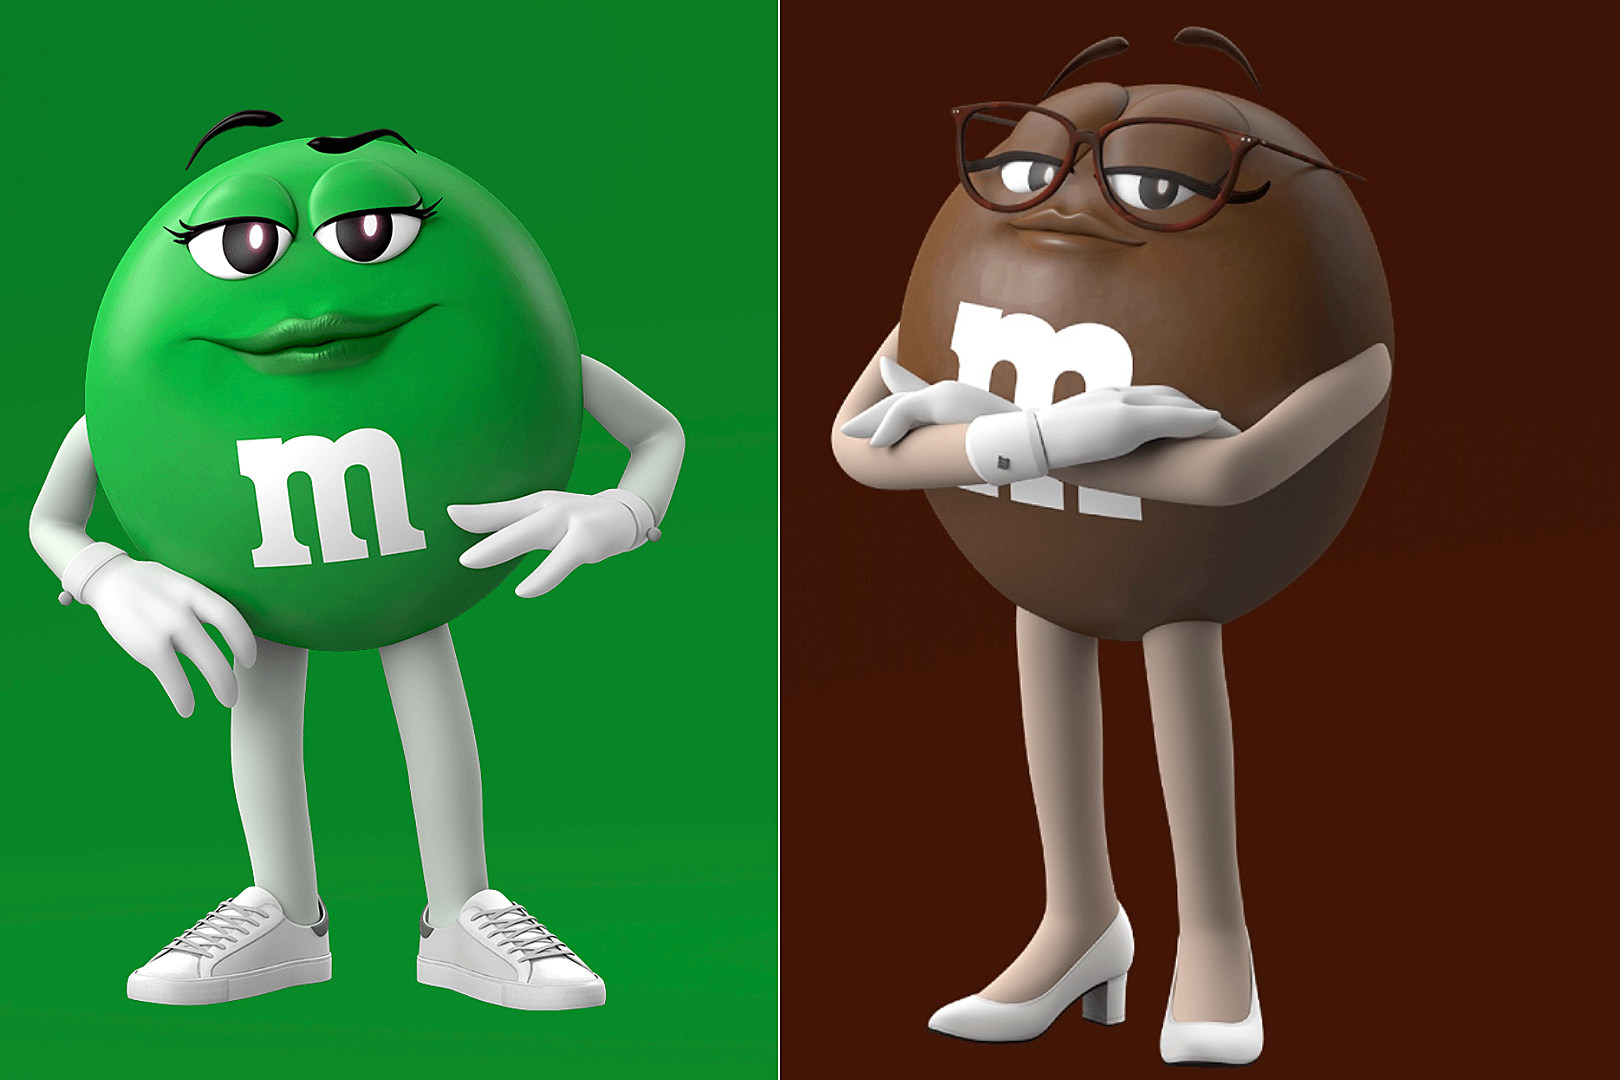 The Green M&M's Redesign Has Everyone Up in Arms - PAPER Magazine